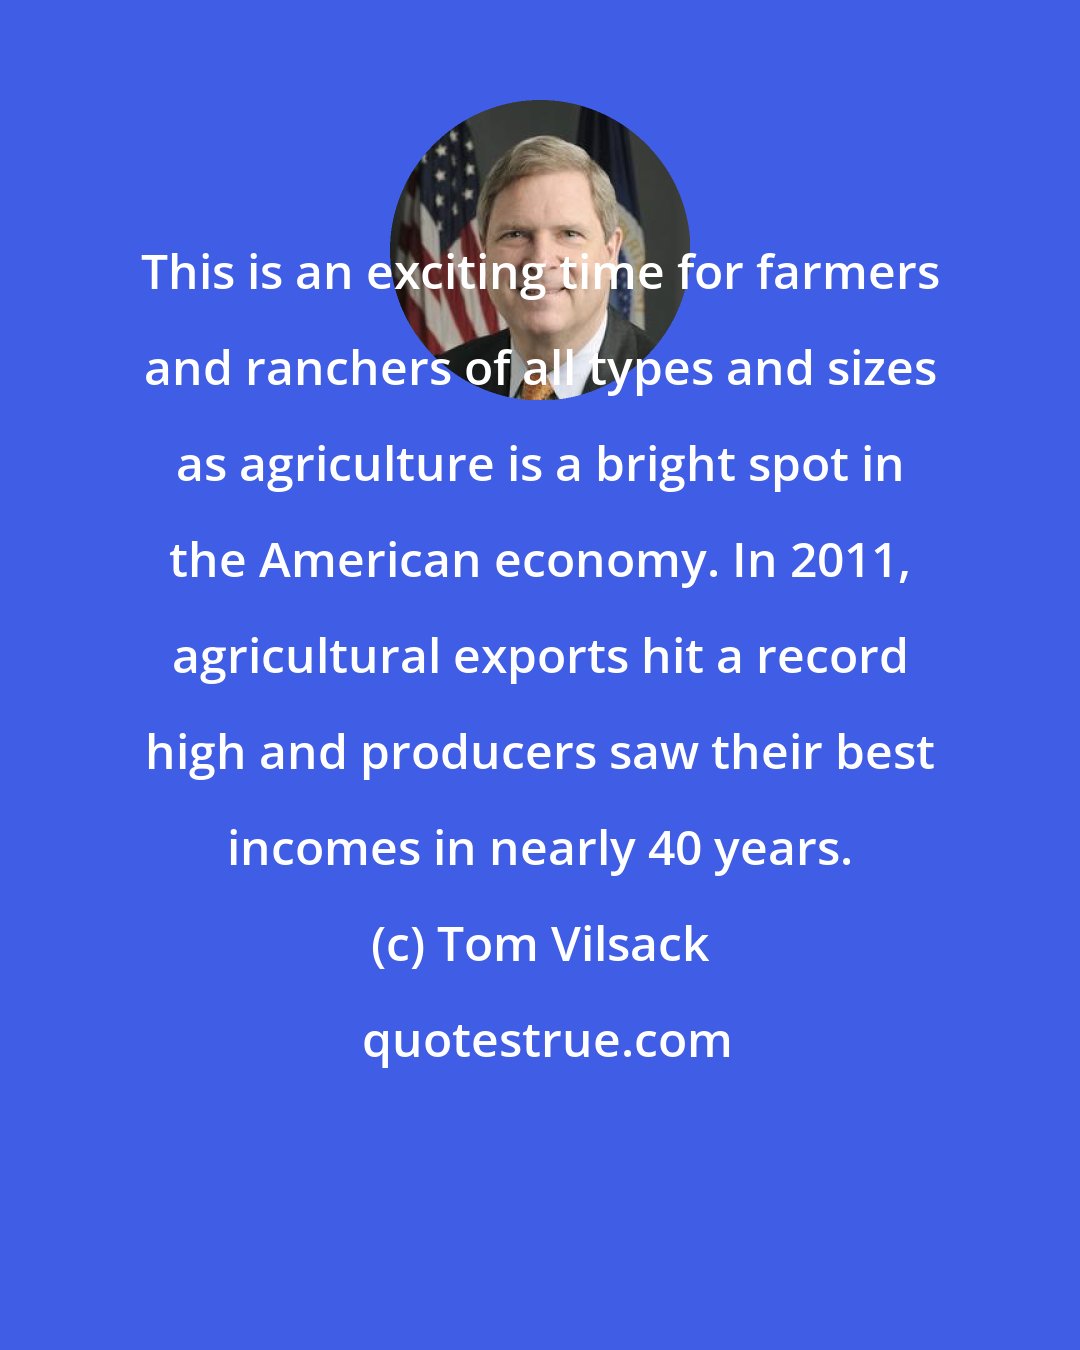 Tom Vilsack: This is an exciting time for farmers and ranchers of all types and sizes as agriculture is a bright spot in the American economy. In 2011, agricultural exports hit a record high and producers saw their best incomes in nearly 40 years.